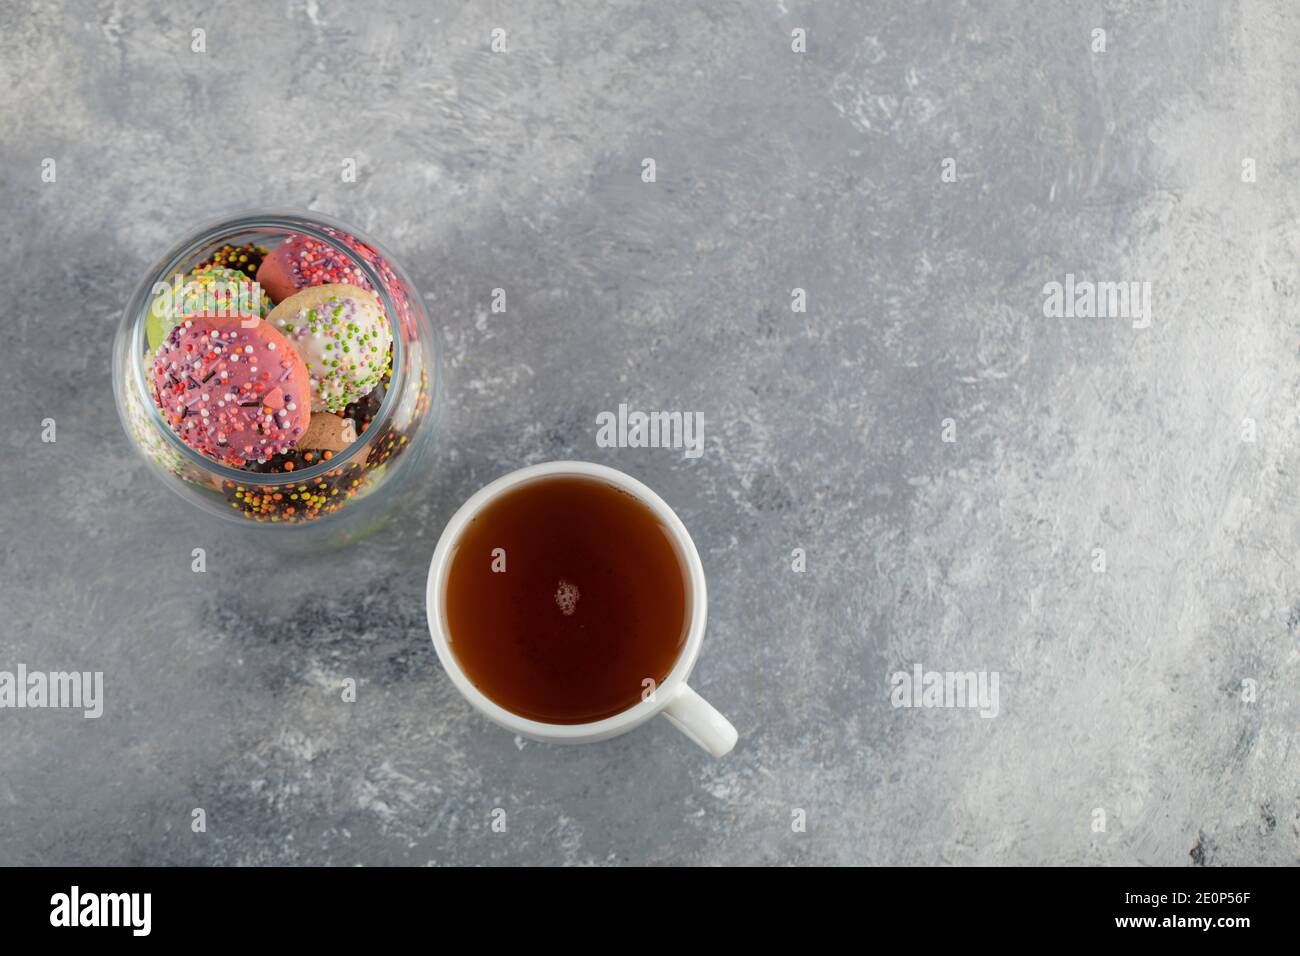 A glass jar full of small colorful doughnuts with a cup of hot tea Stock Photo